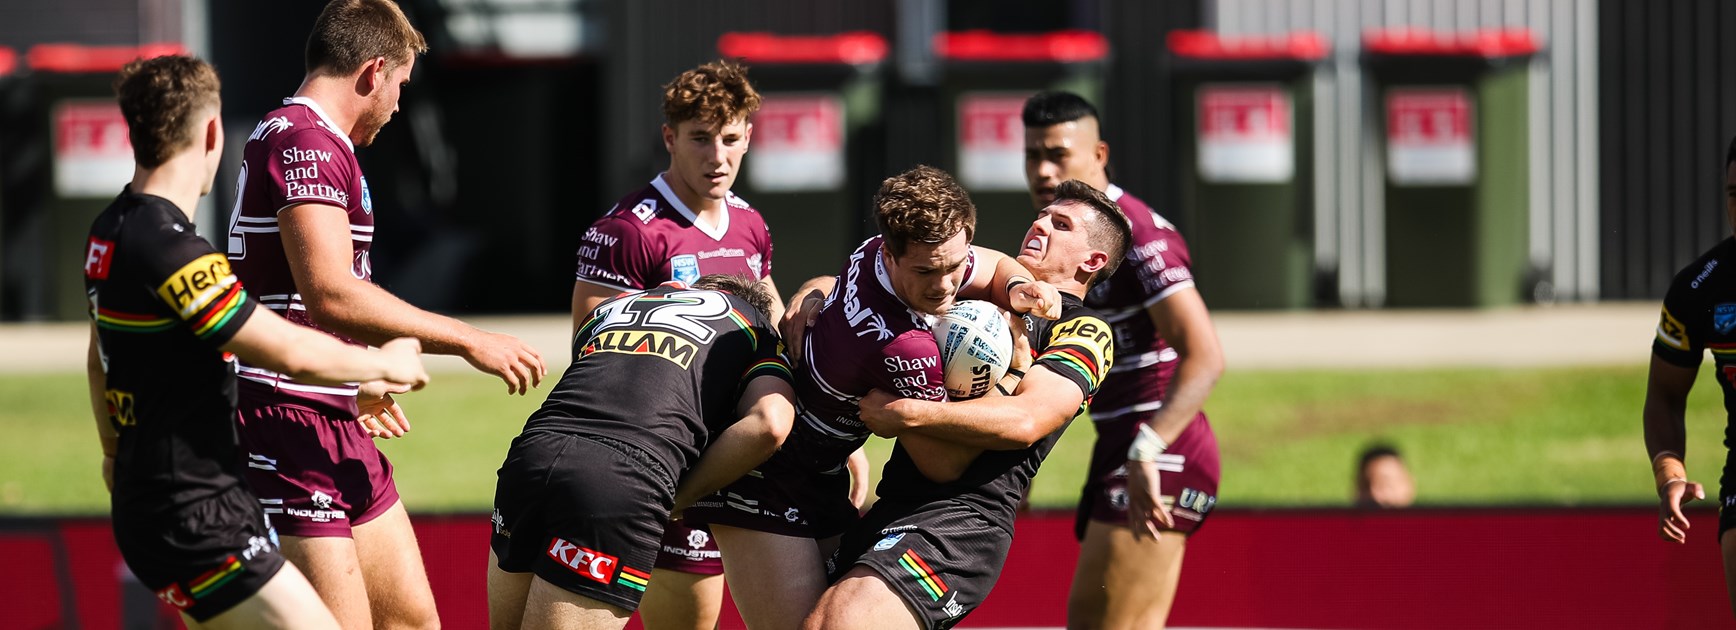 Manly will be out to improve on their first half start against Penrith last week.